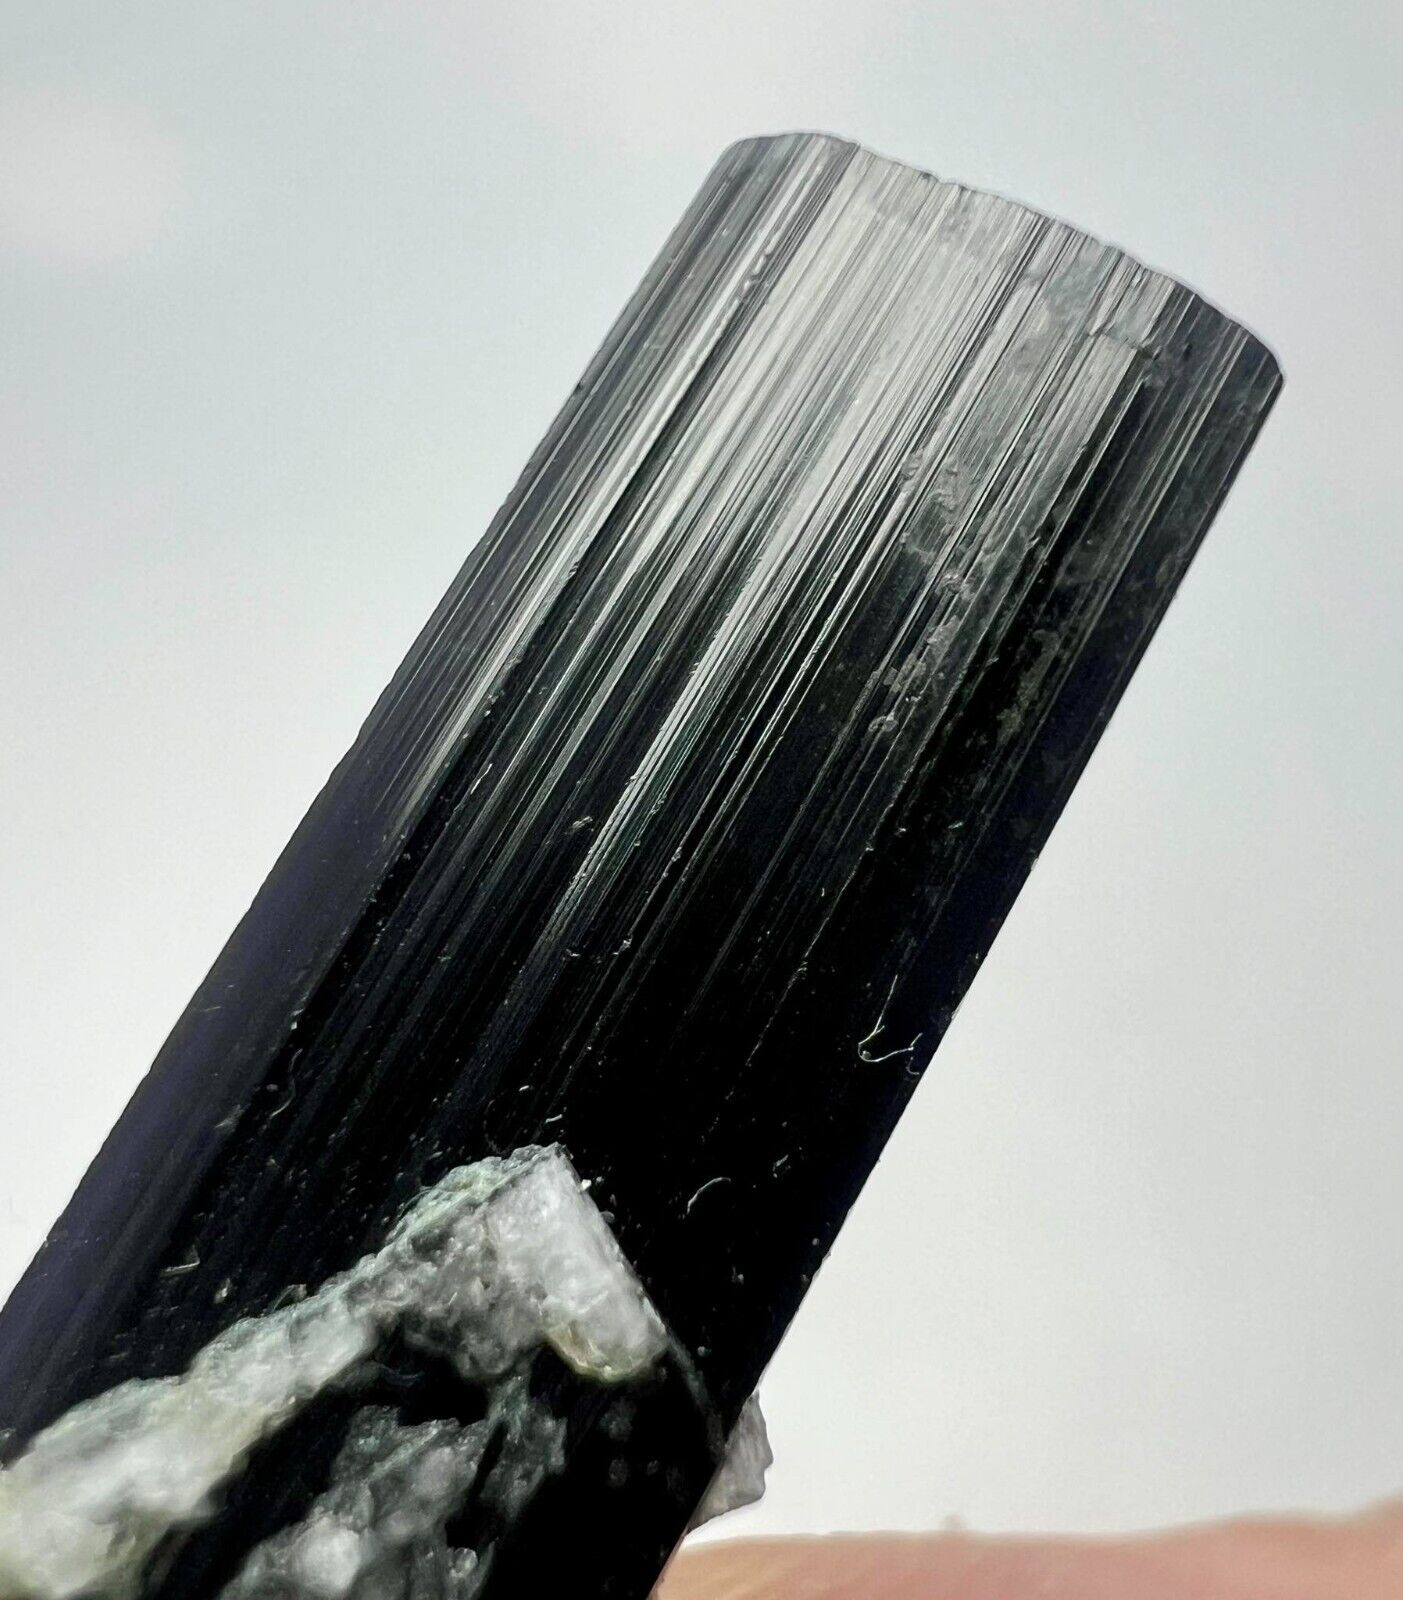 19 Carats Well Terminated Black Tourmaline Crystal On Matrix From Afghanistan